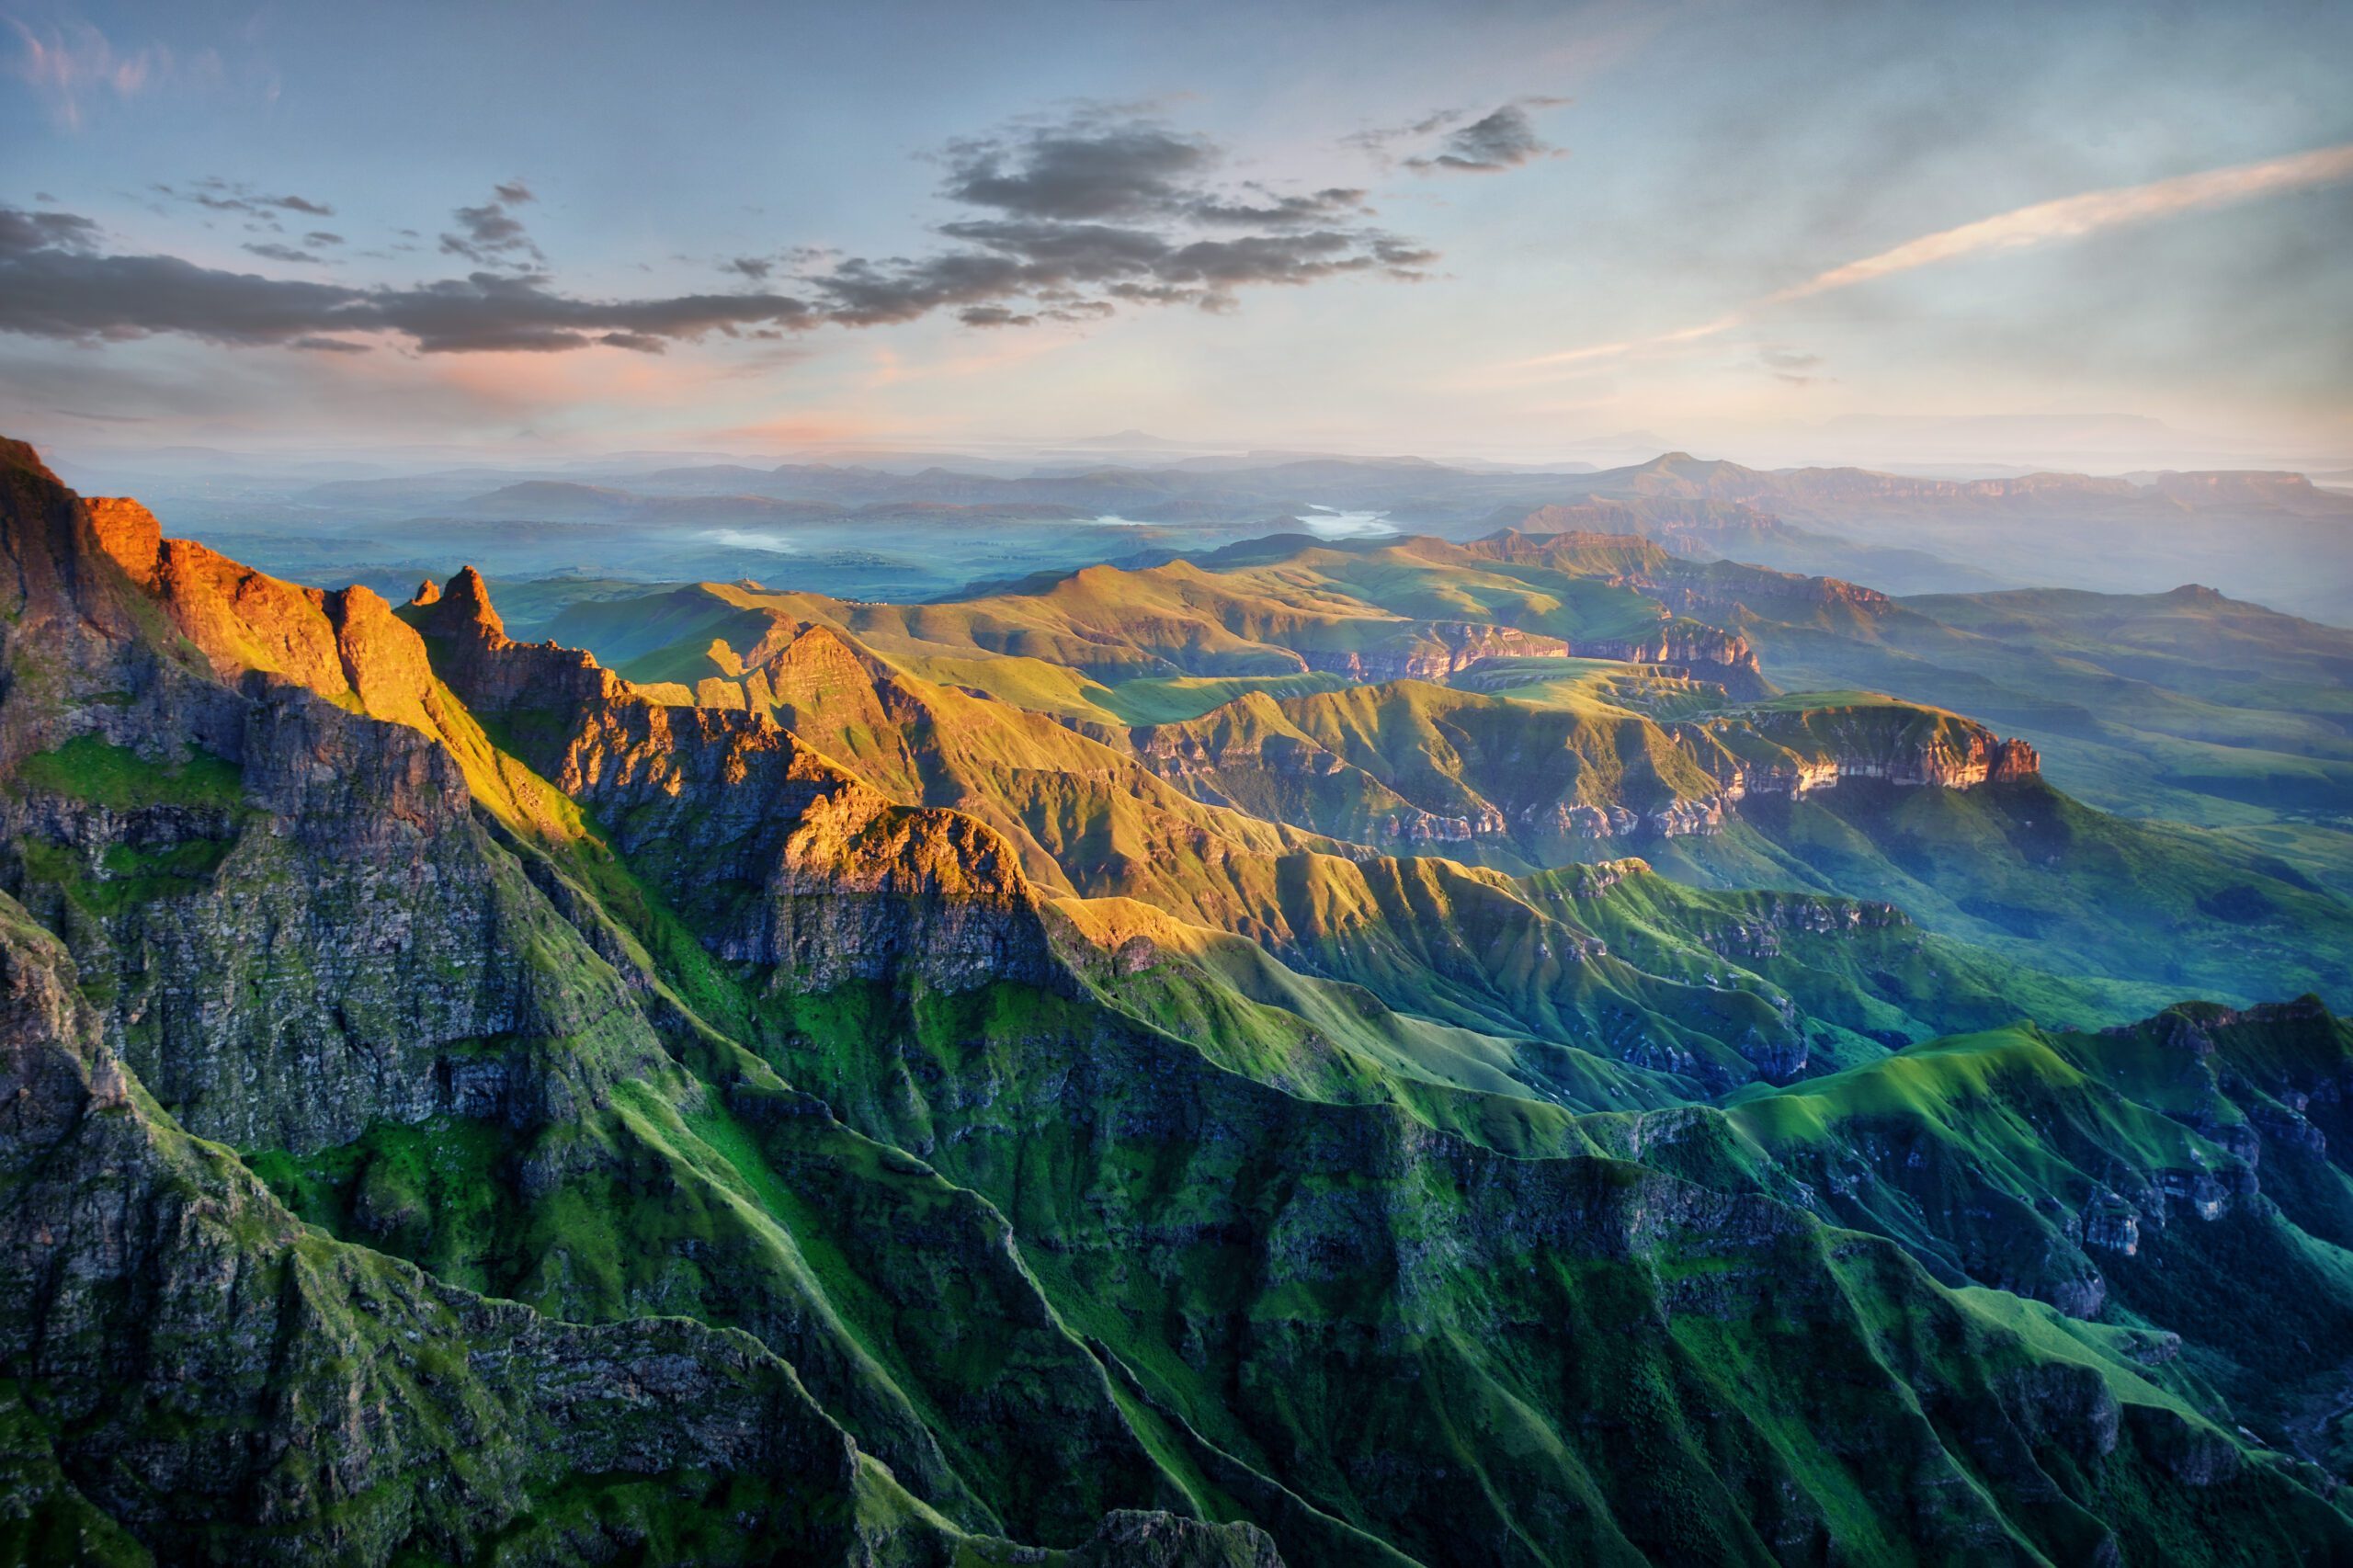 A breathtaking view of the Majestic Drakensberg mountains